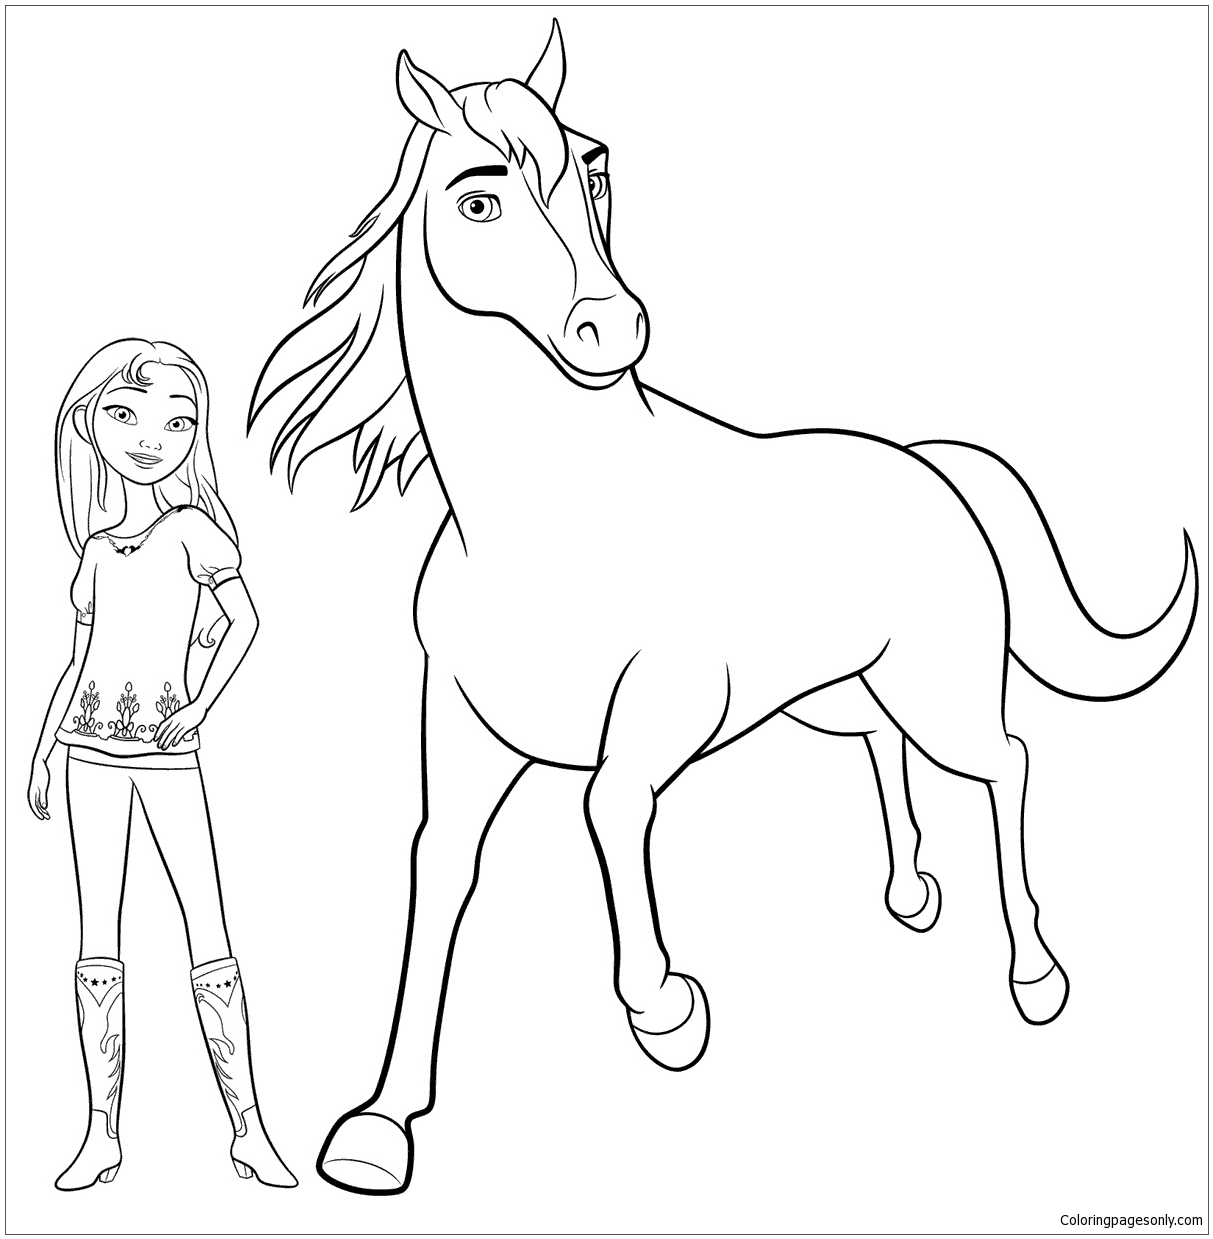 Horse and Girl Coloring Pages - Horse Coloring Pages - Coloring Pages